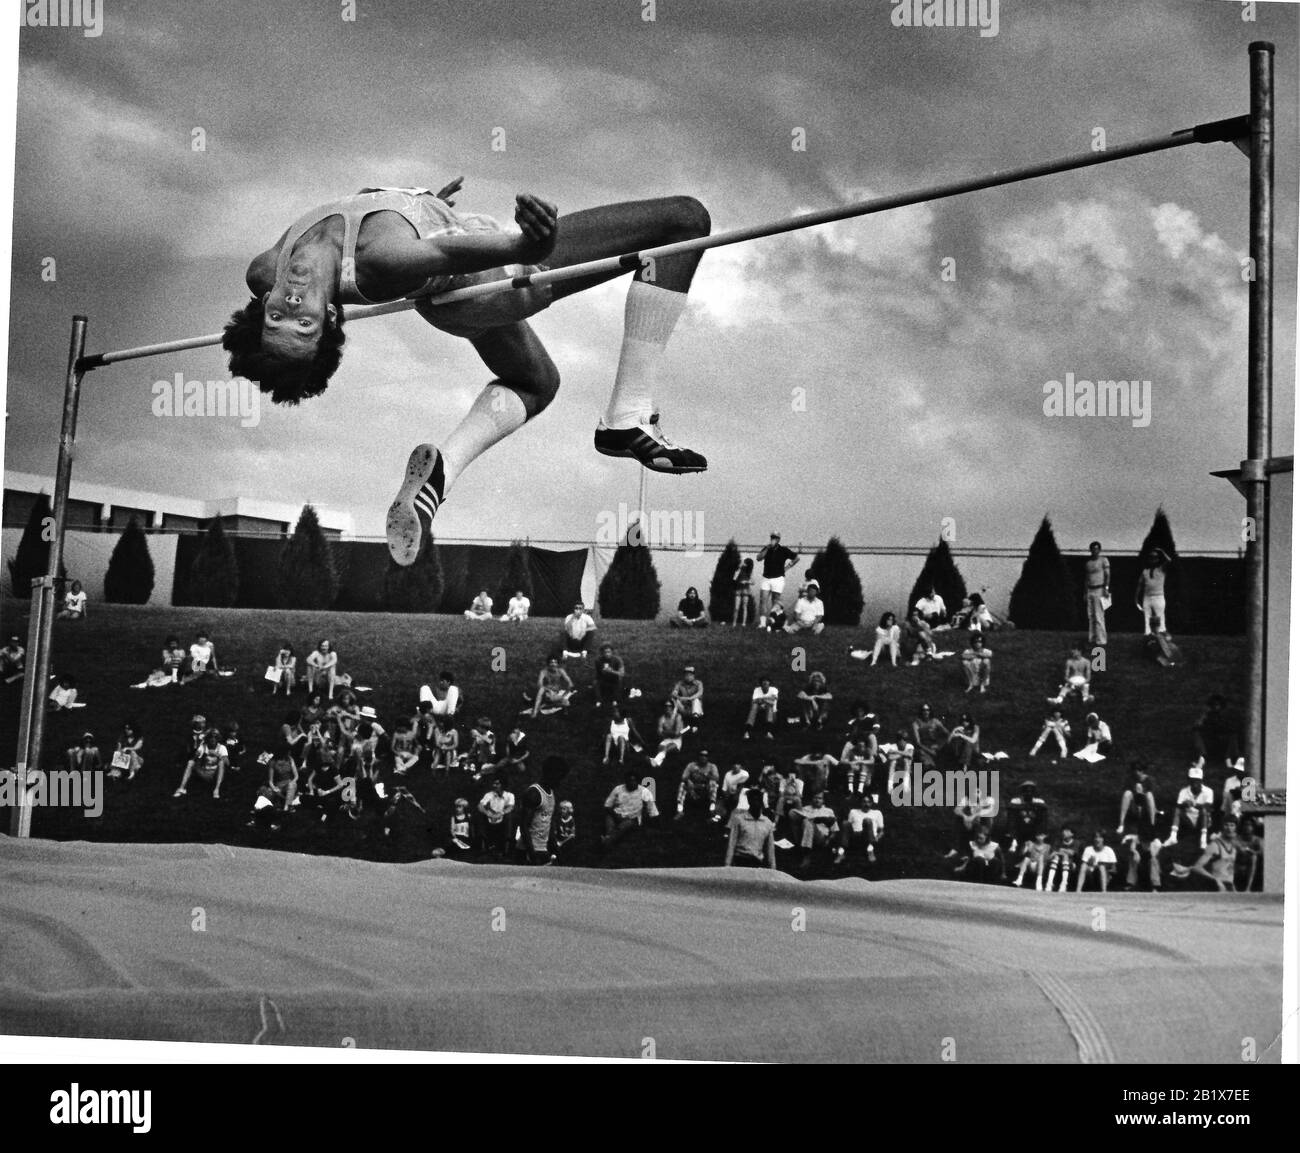 High jumper in Wichita during meet with clouds as he clears the height Stock Photo